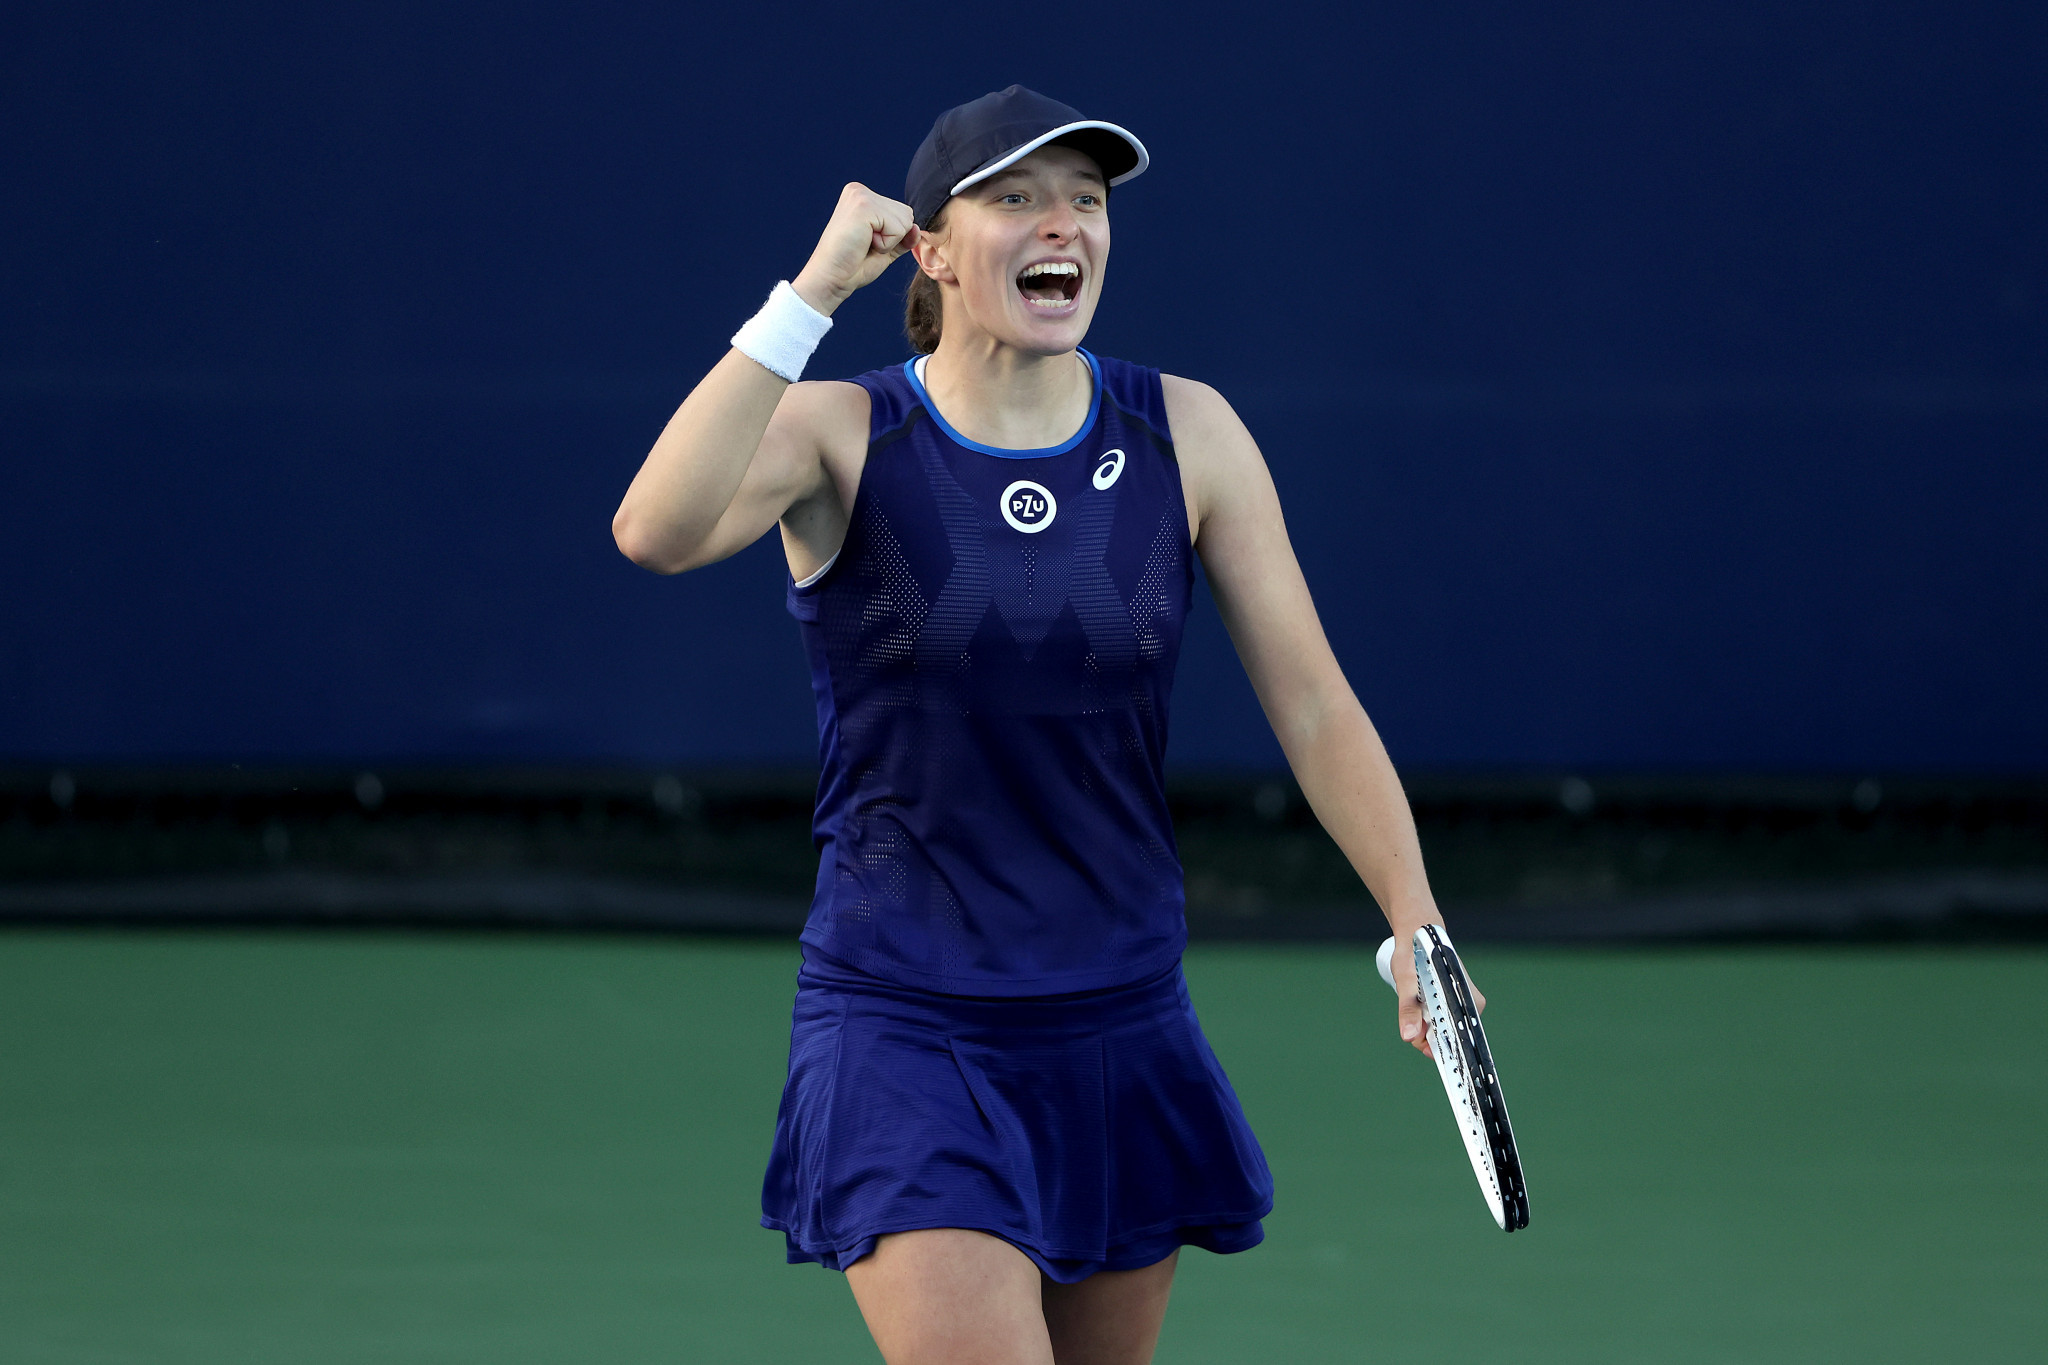 Świątek to be challenged by newcomers at WTA Finals in Texas